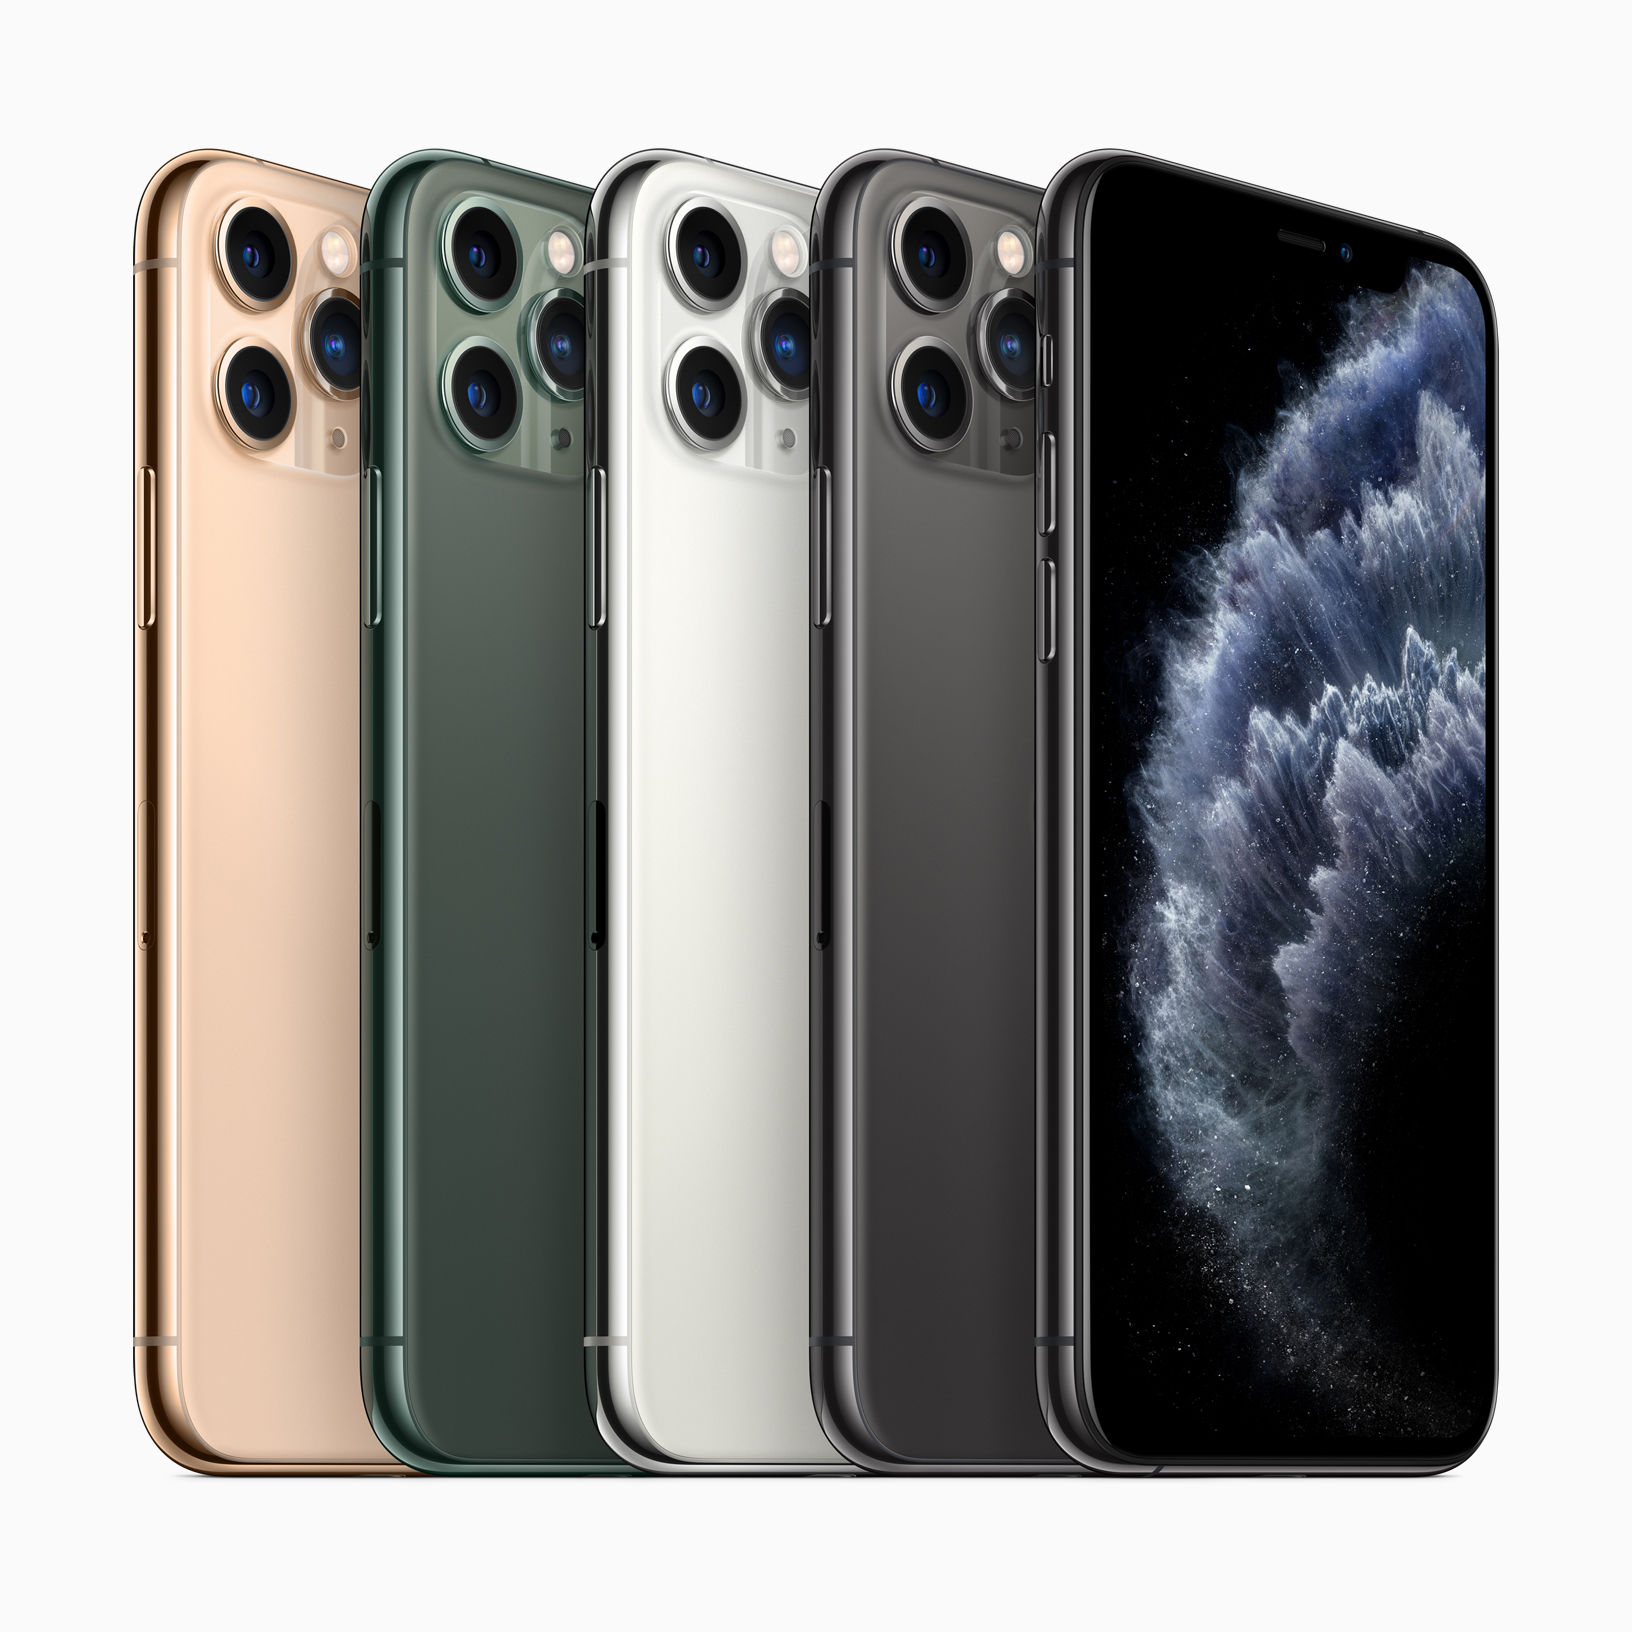 Apple Unveils iPhone 11 Pro and iPhone 11 Pro Max - A13 Bionic, Triple-Lens Camera System, More